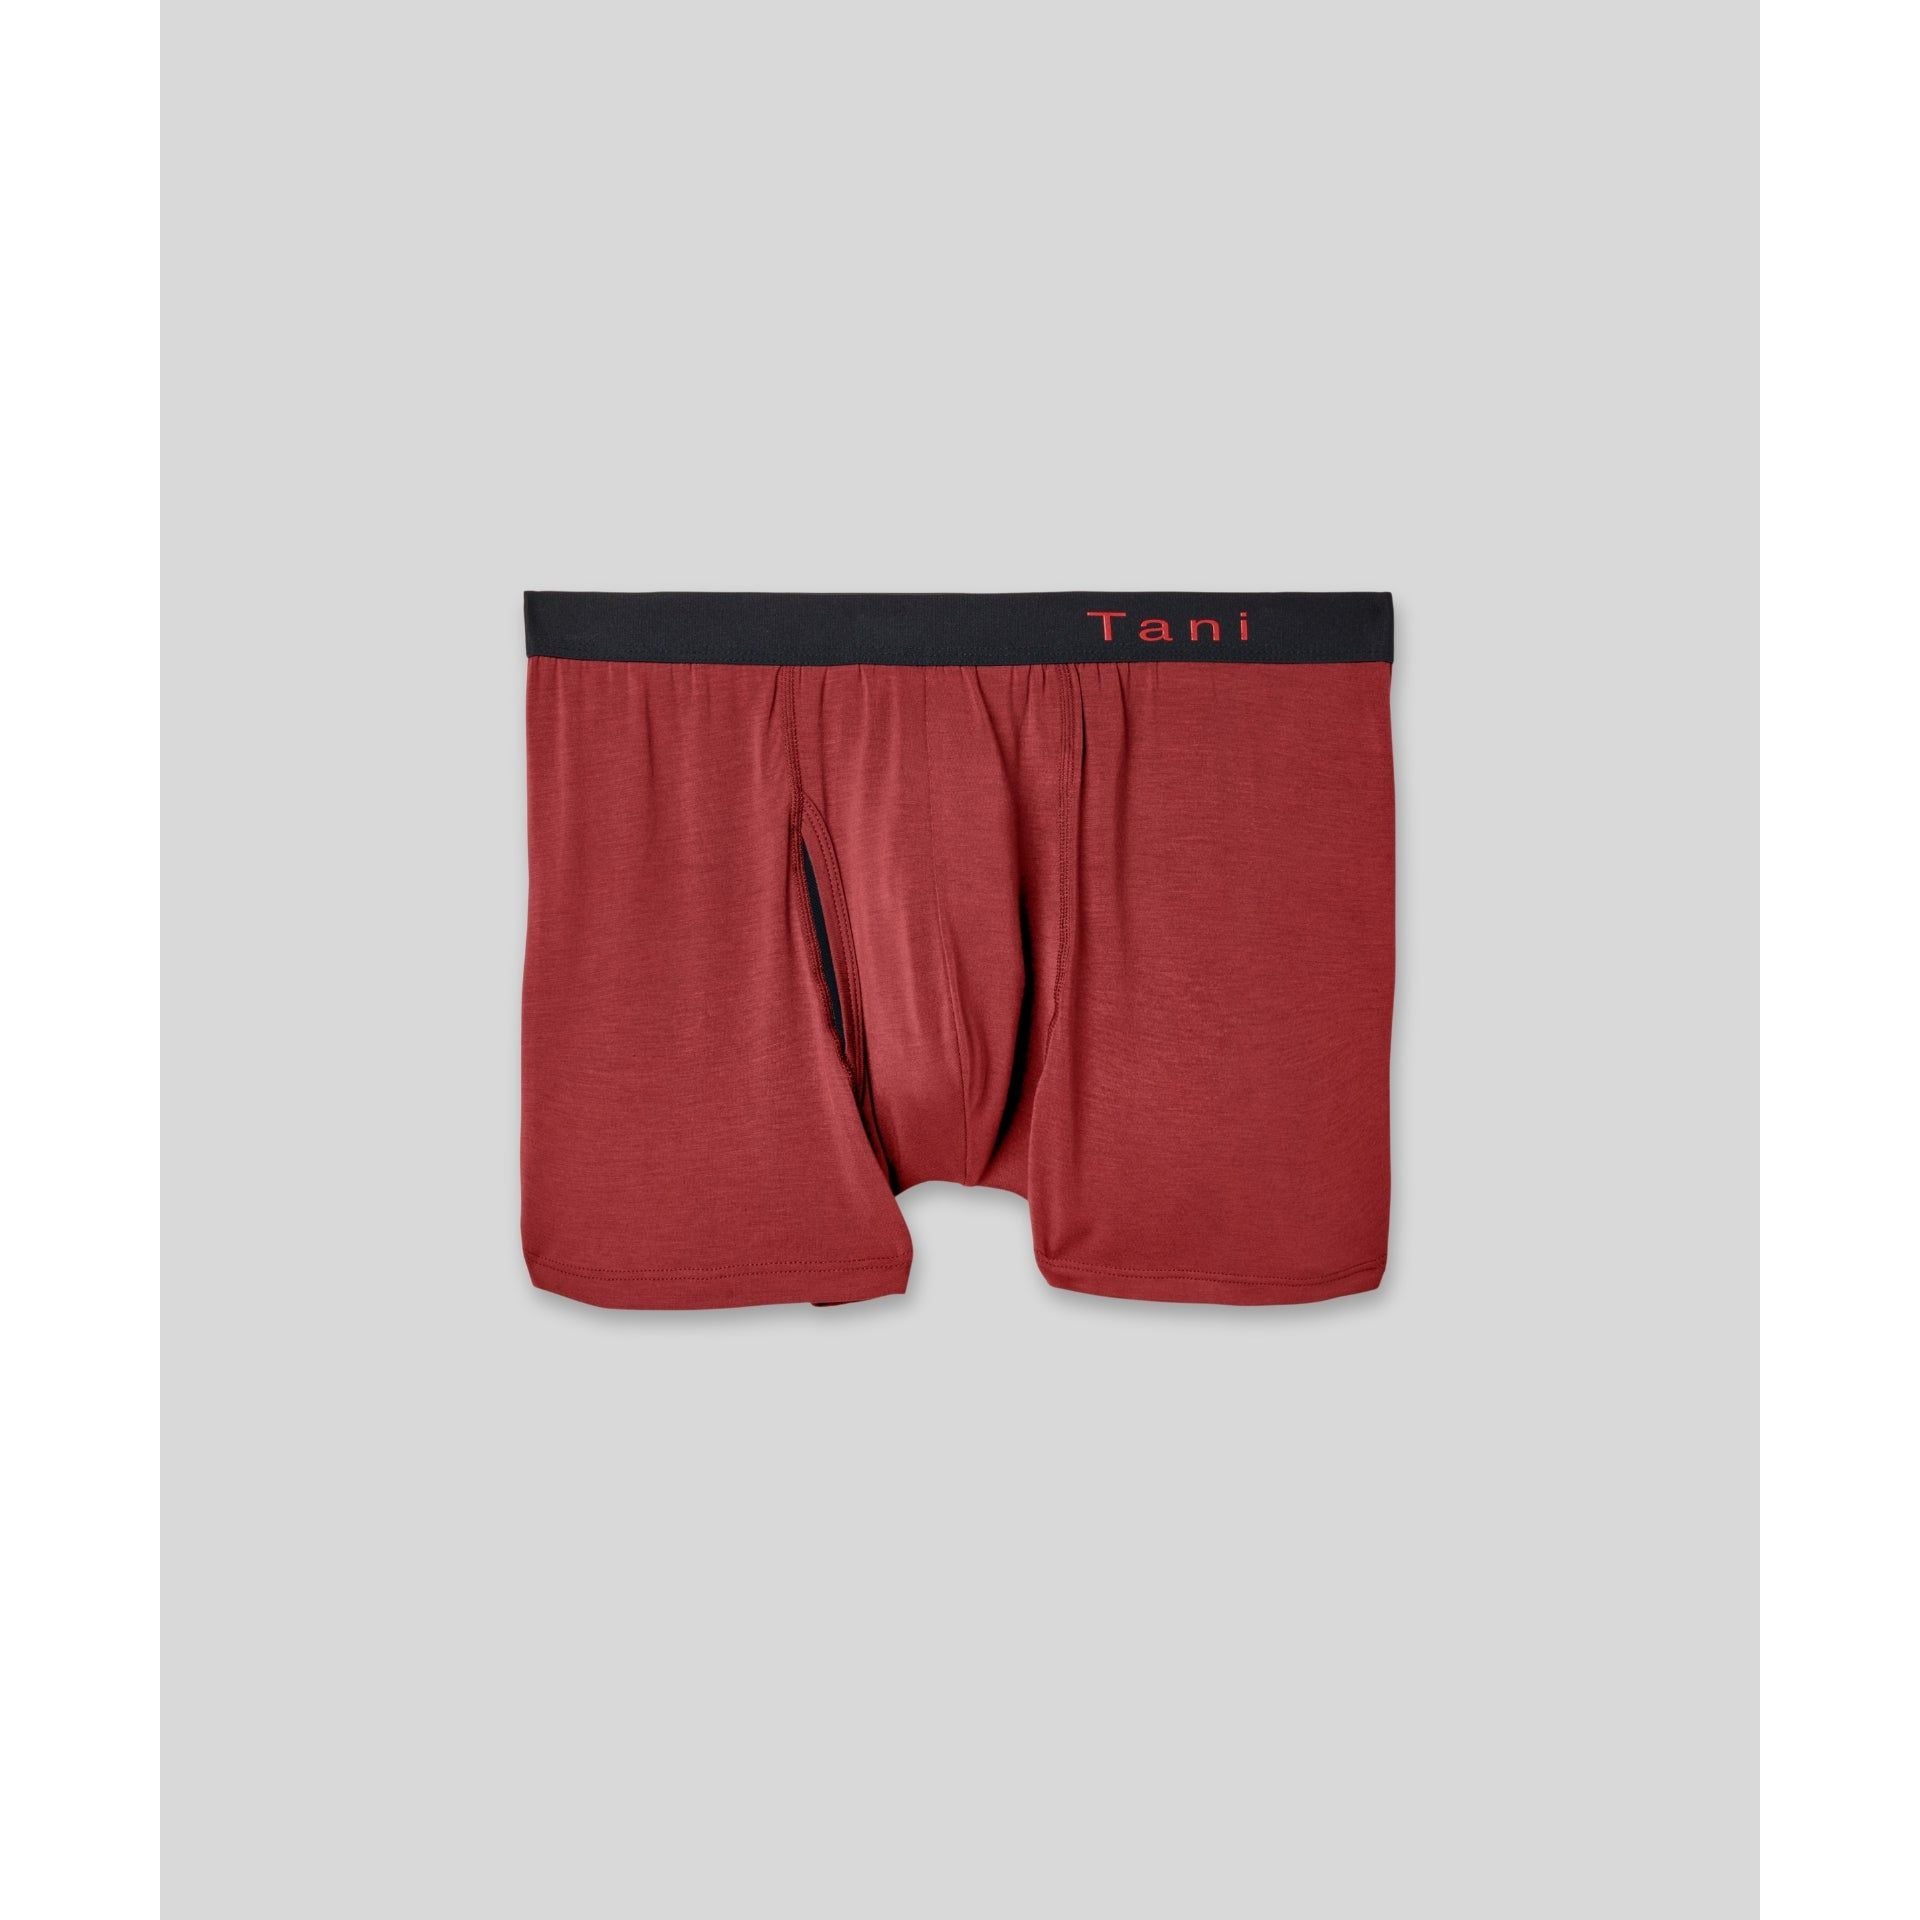 Hybrid Pouch Fly Boxer Briefs in assorted colors laid flat